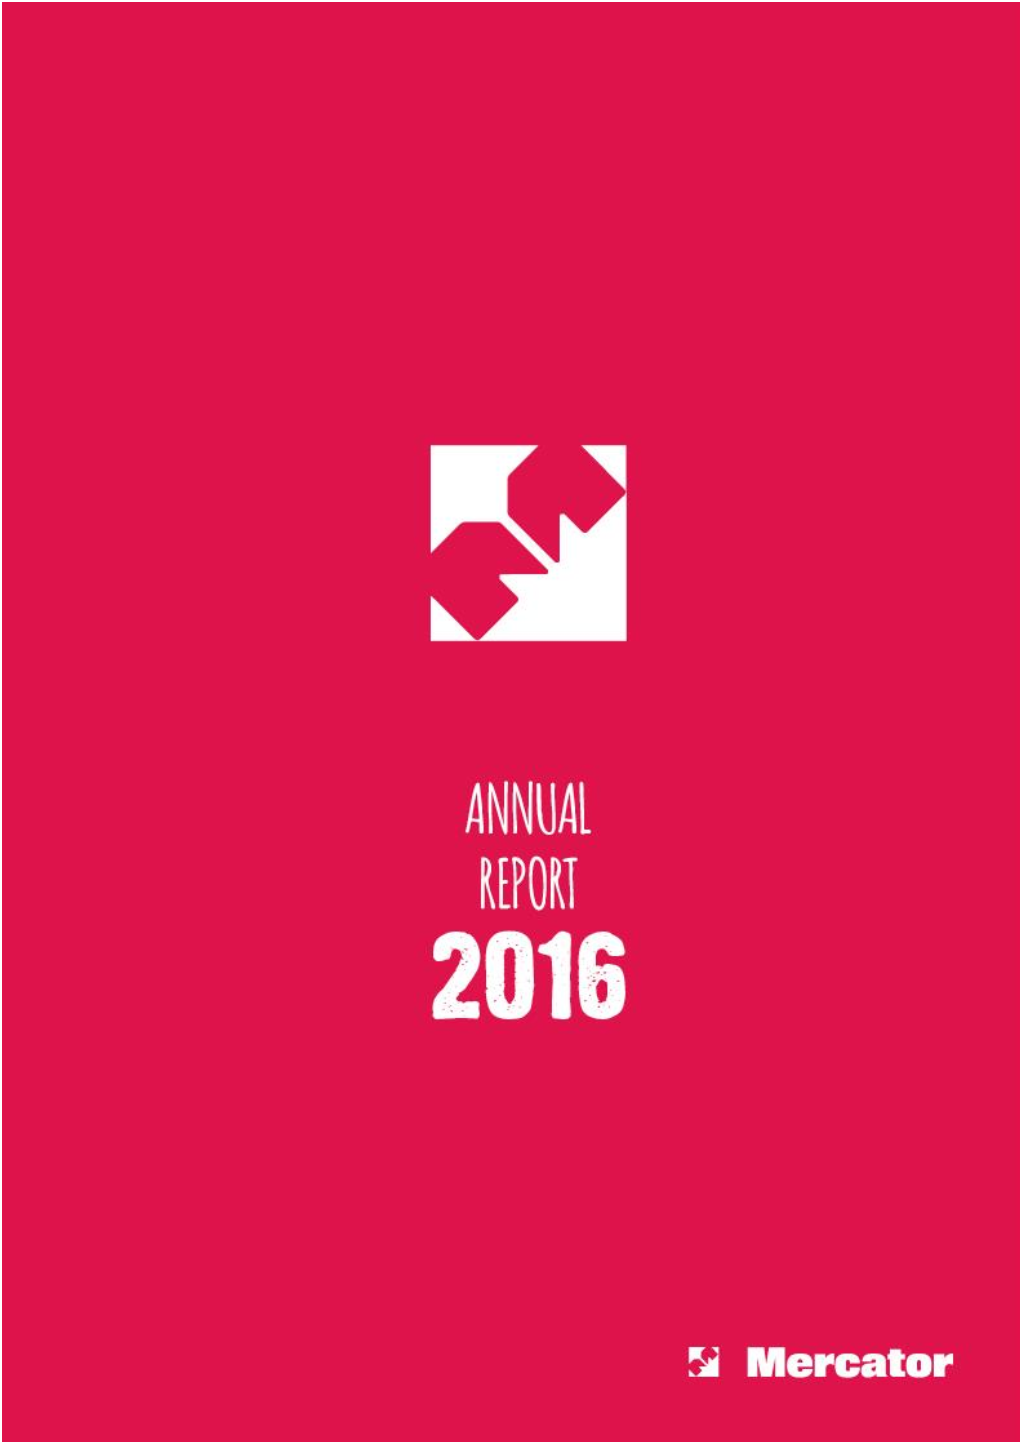 Mercator Group Annual Report for 2016